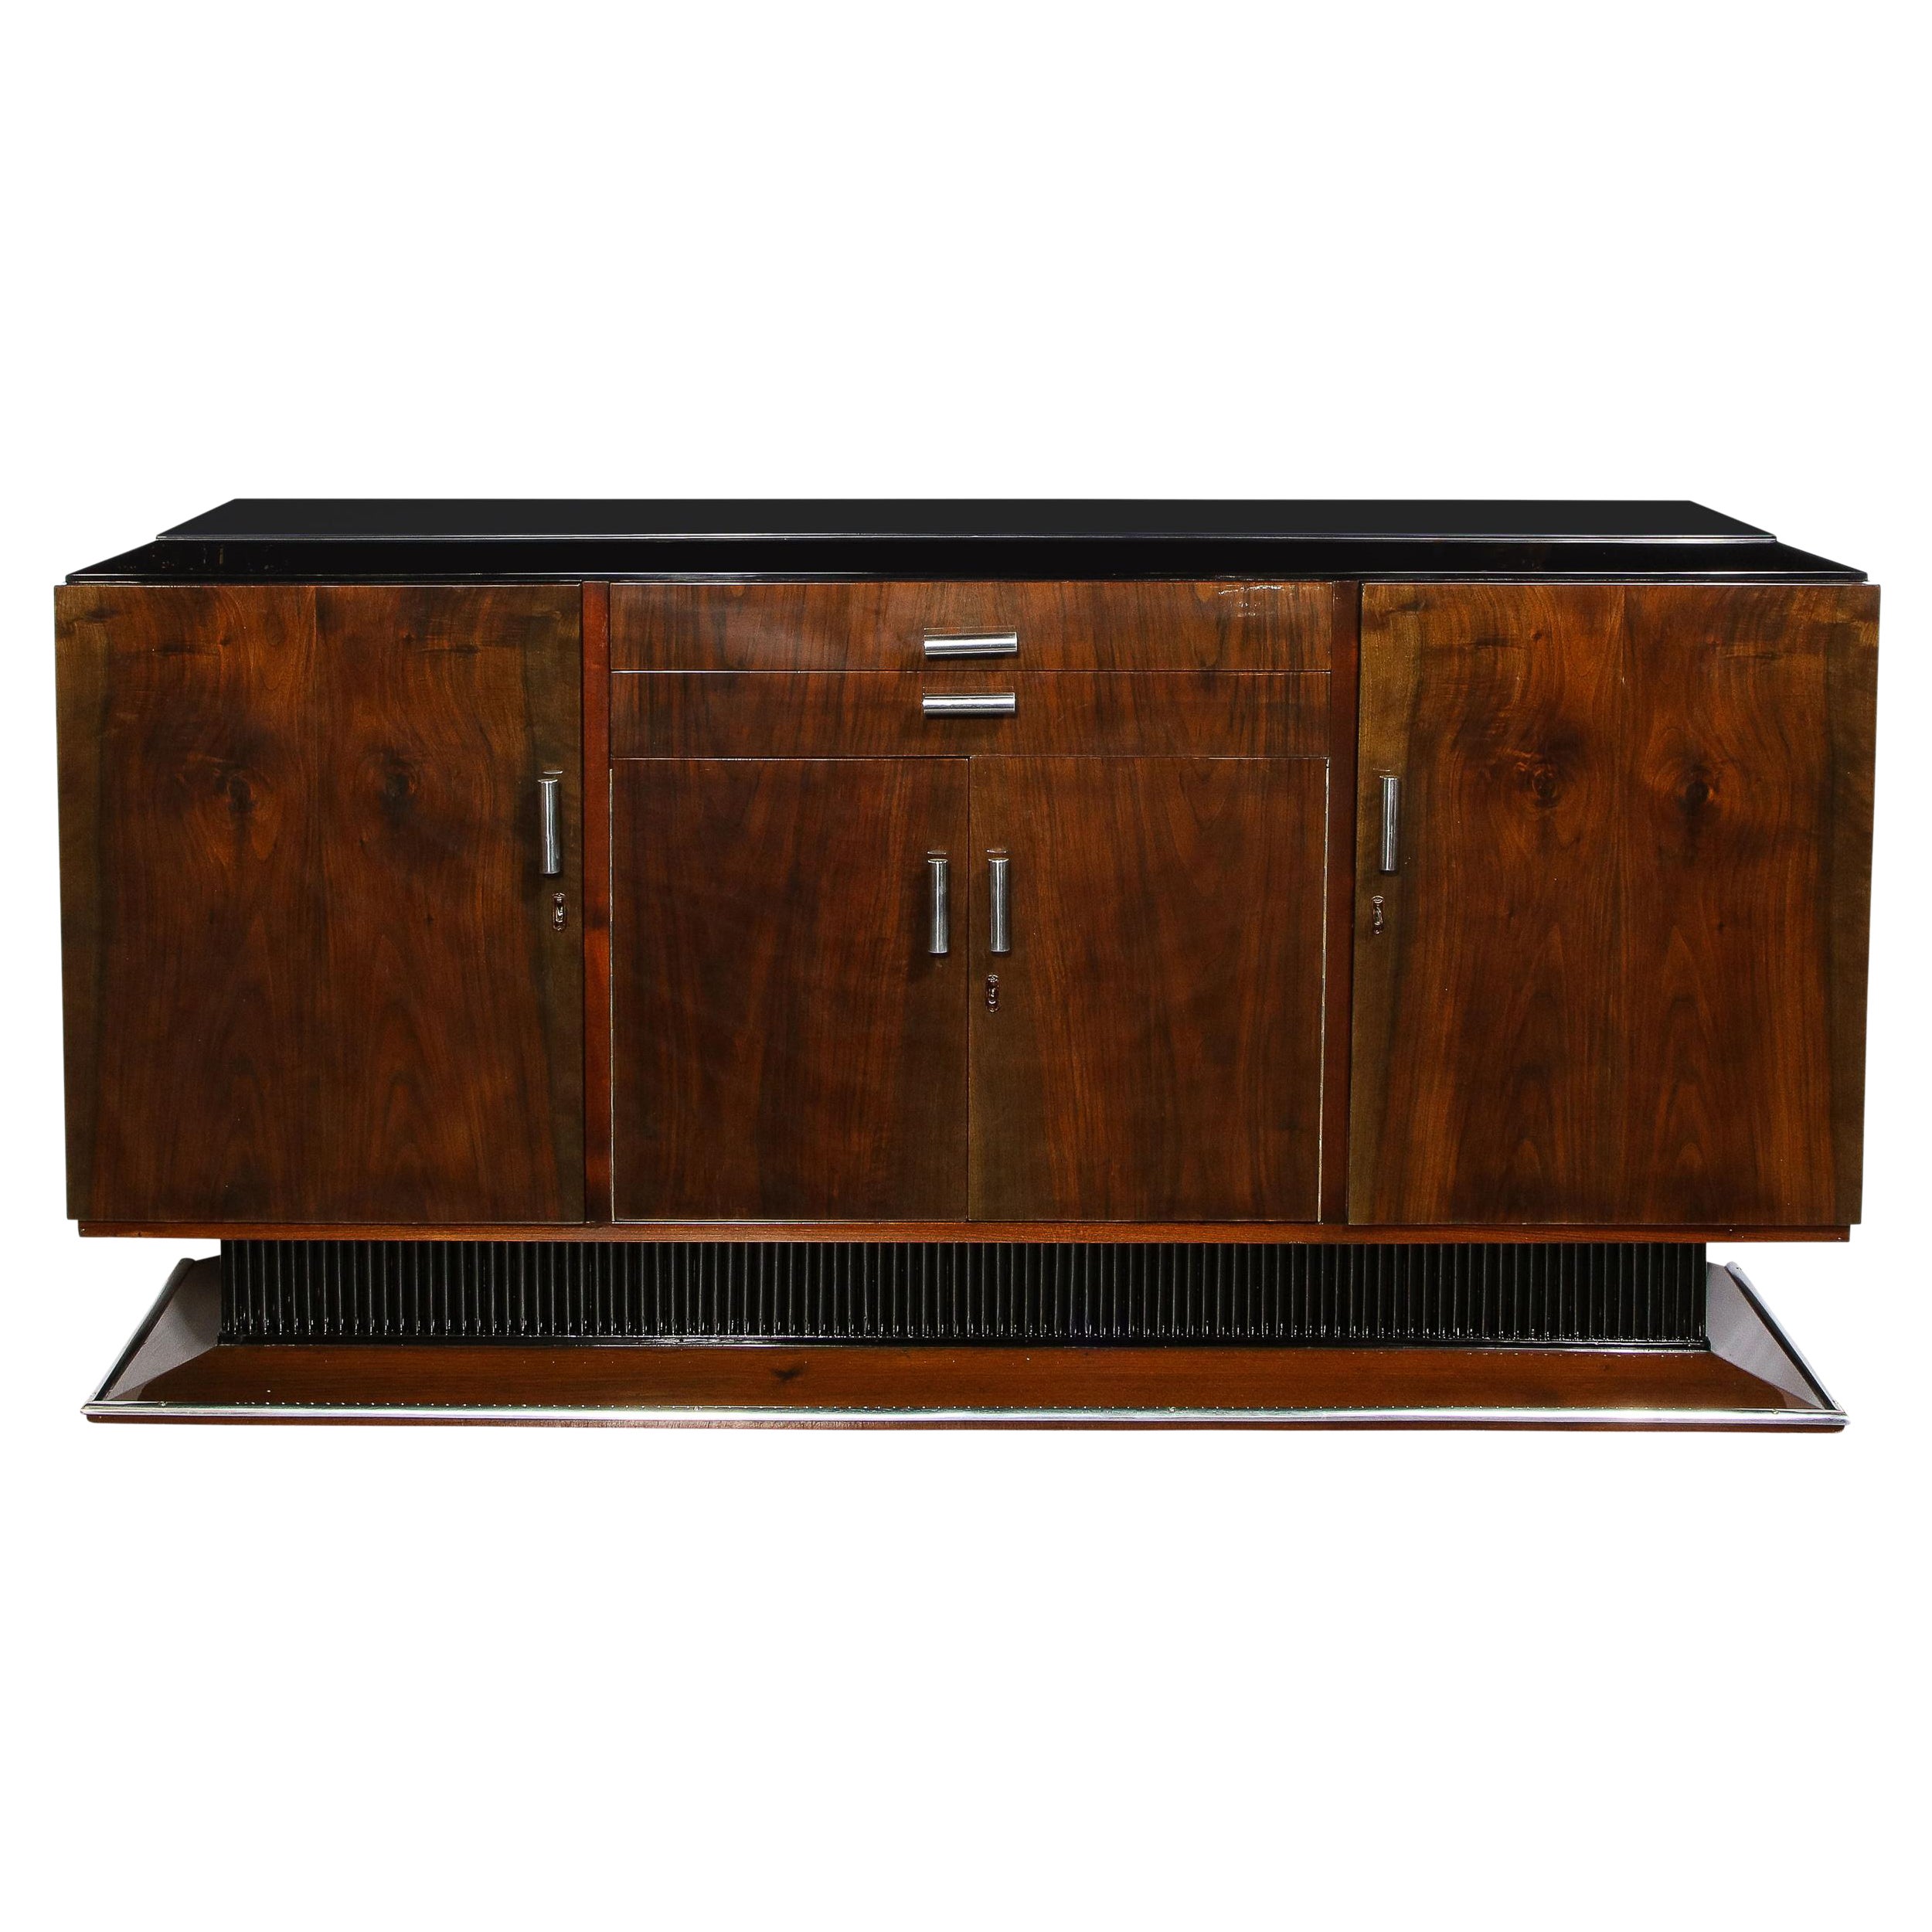 Art Deco Bookmatched Walnut & Lacquer Sideboard with Streamlined Aluminum Pulls For Sale